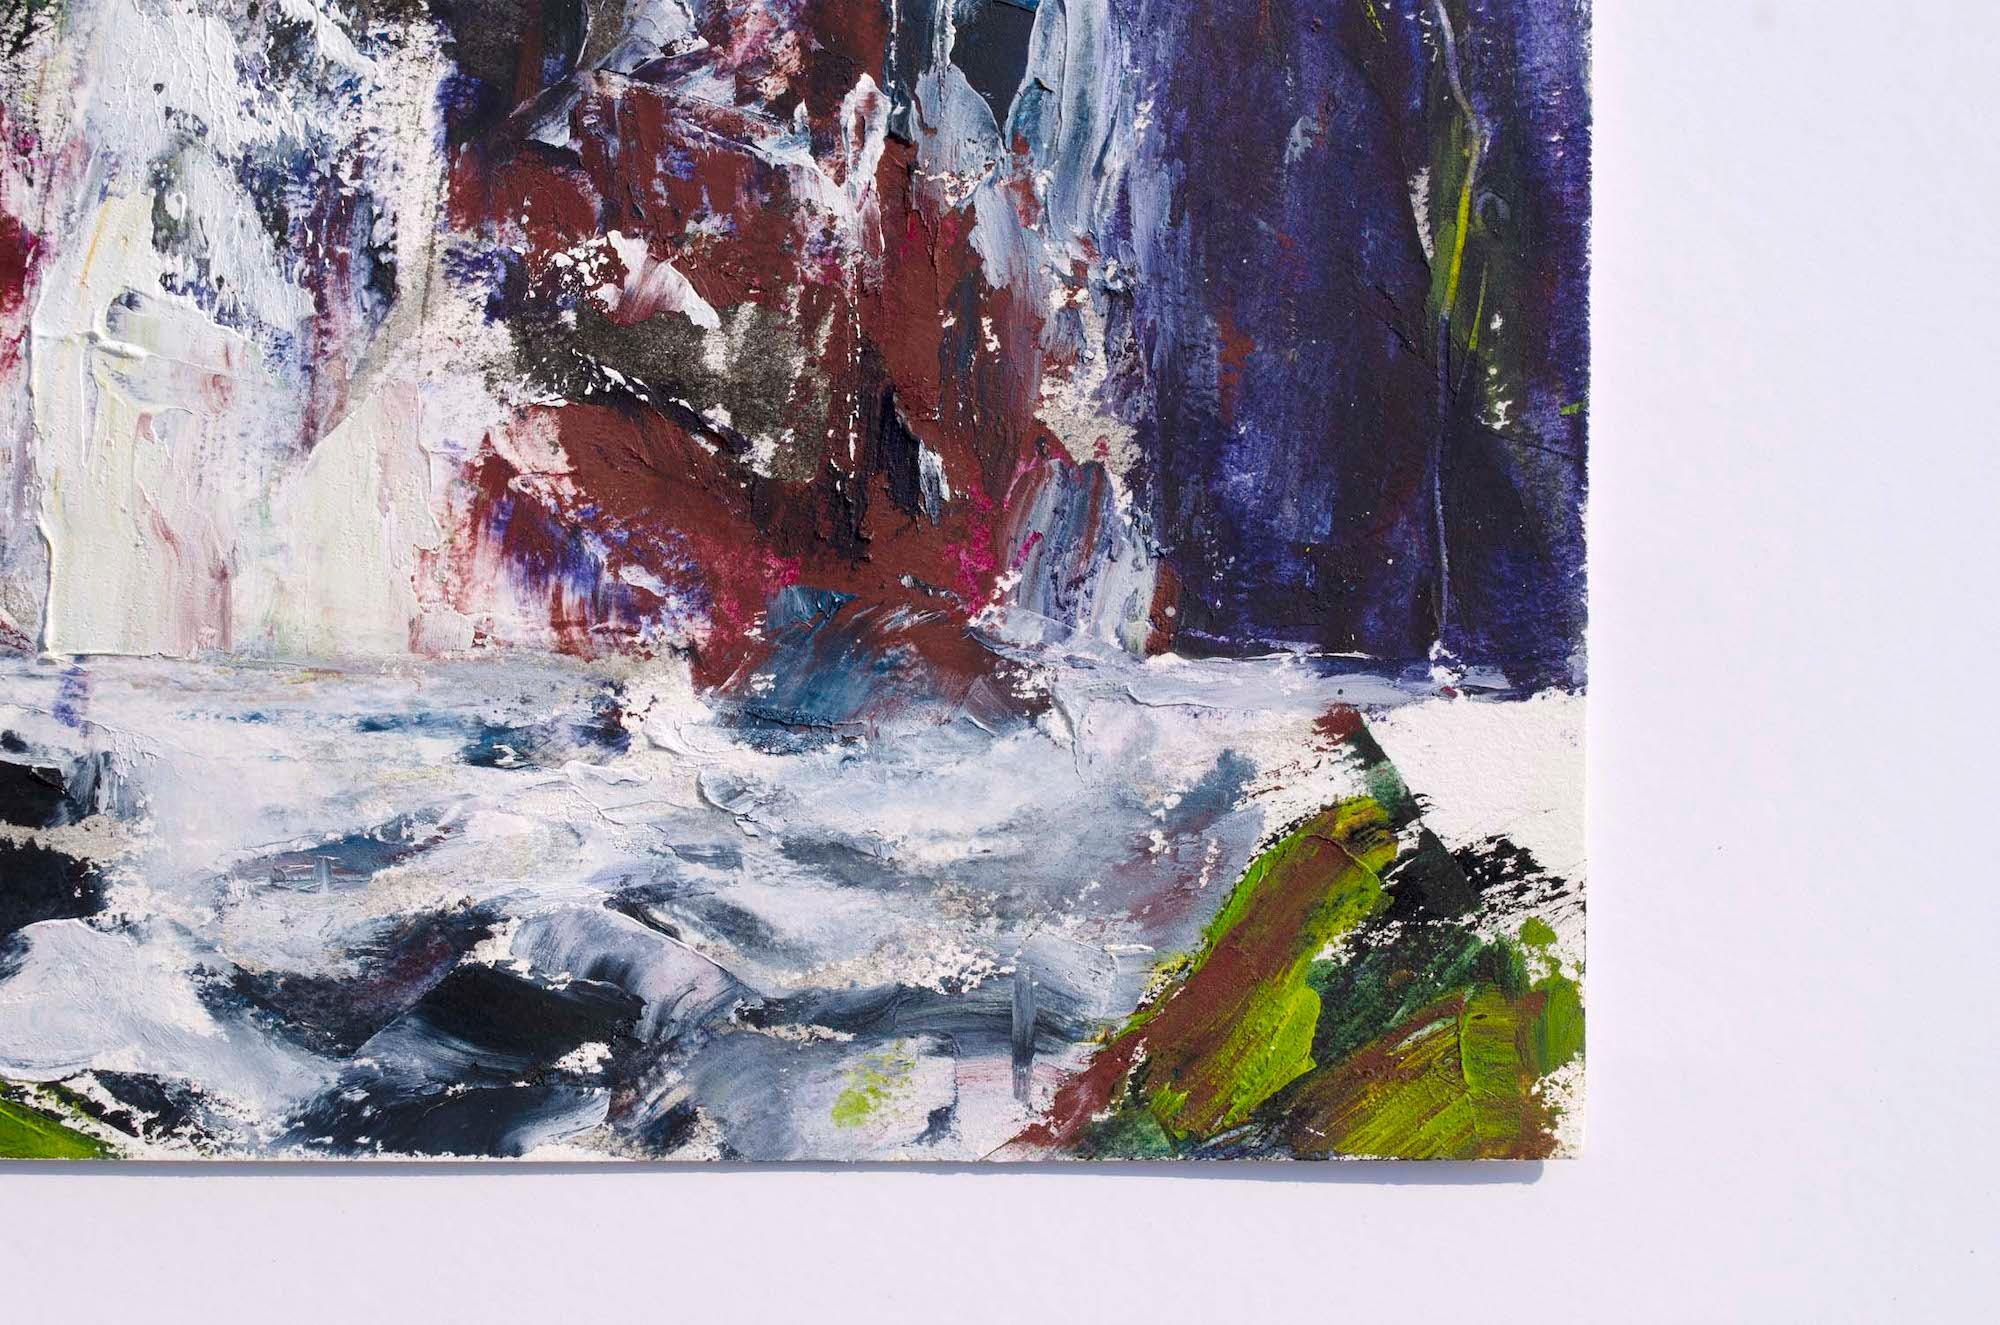 <p>Artist Comments<br>Artist Tiffany Blaise pictures an expressionist view of a dynamic waterfall. The rapid cascade crashes into a refreshing rainforest stream painted in luminous hues. Nature flows in abundance throughout the lush verdure.